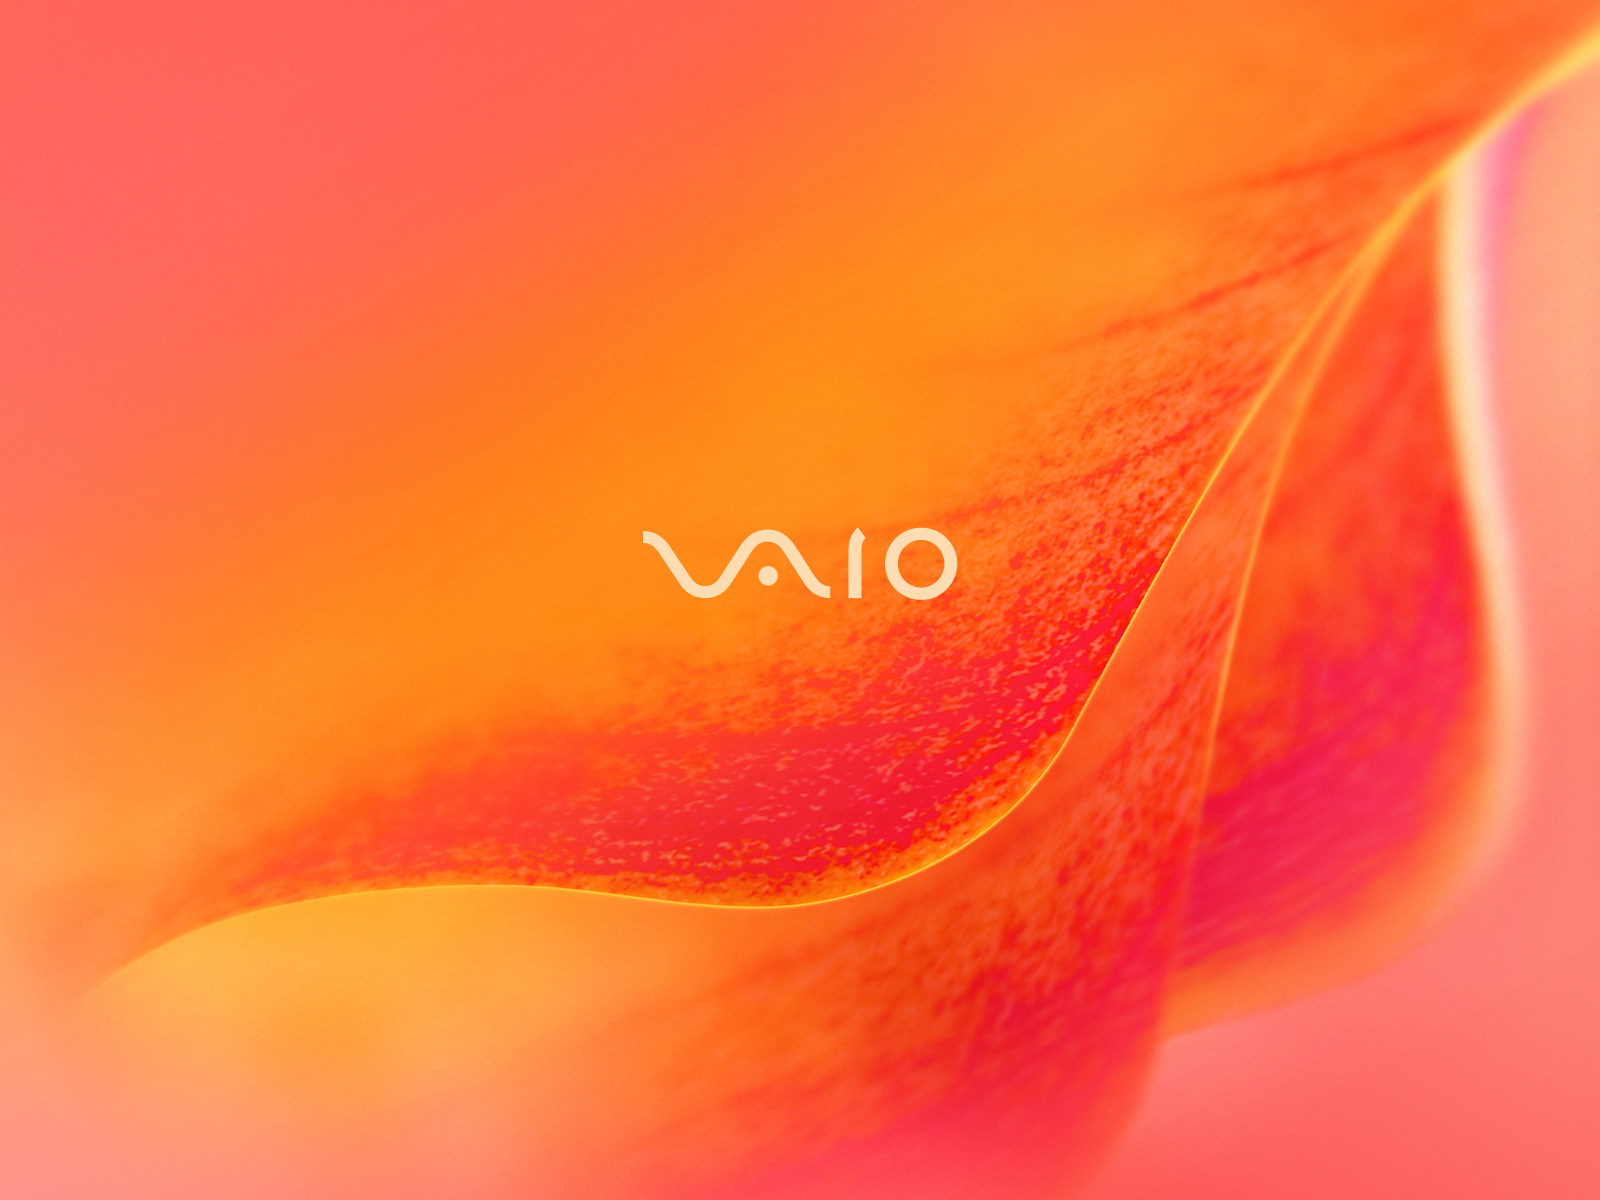 Sony Vaio 5 Wallpapers Wallpapers Hd